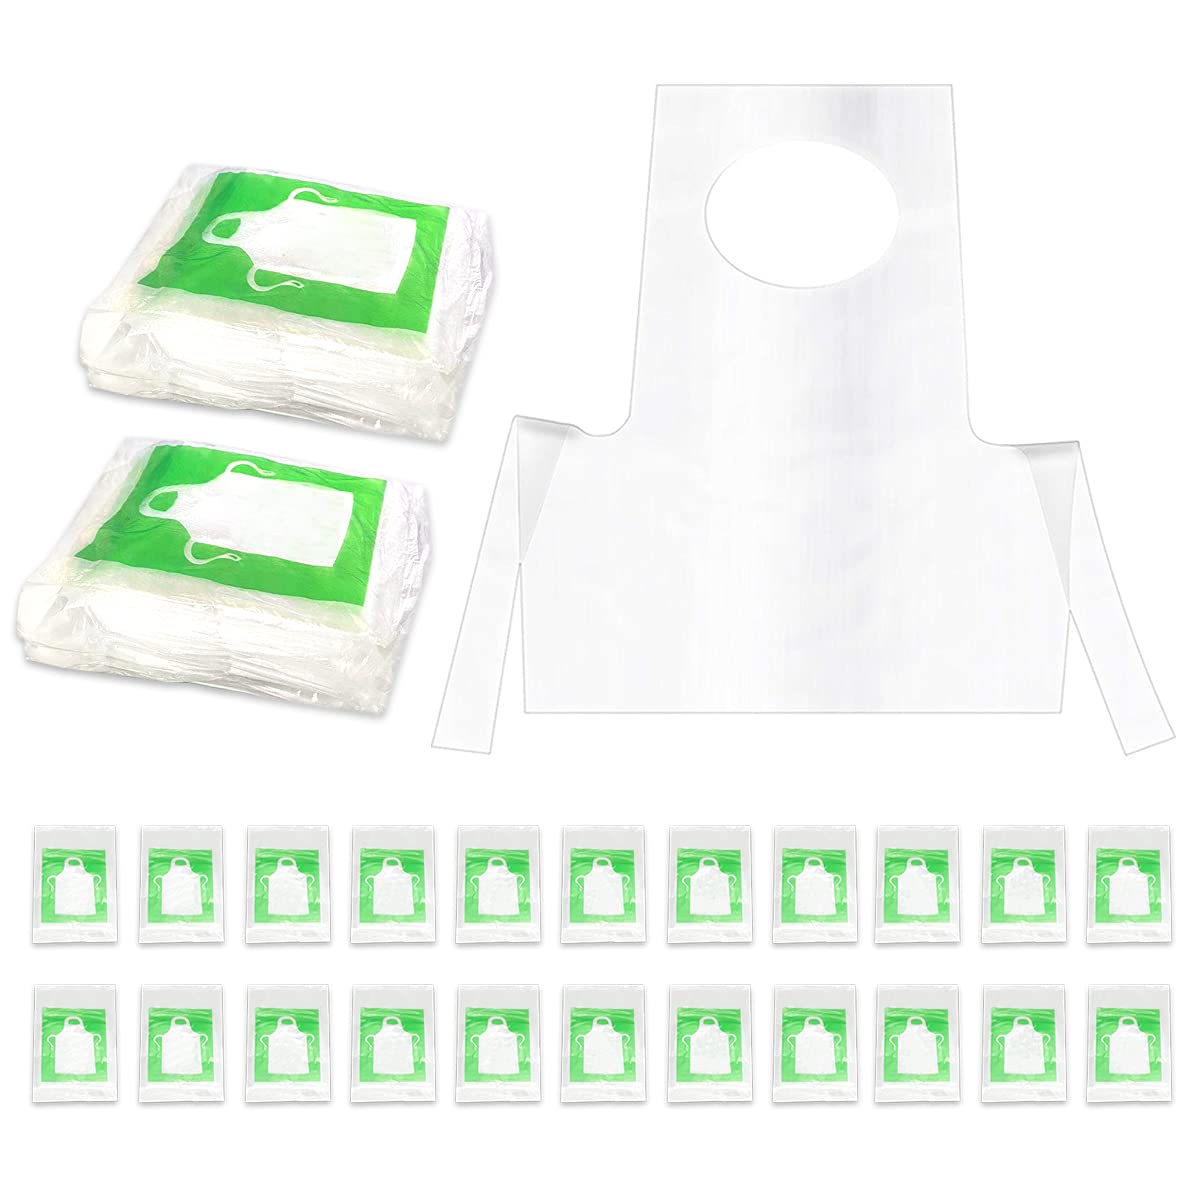 Disposable Aprons Plastic Aprons for Kids Small Clear Polythene Waterproof Great for Painting, Cooking, Age 4-12